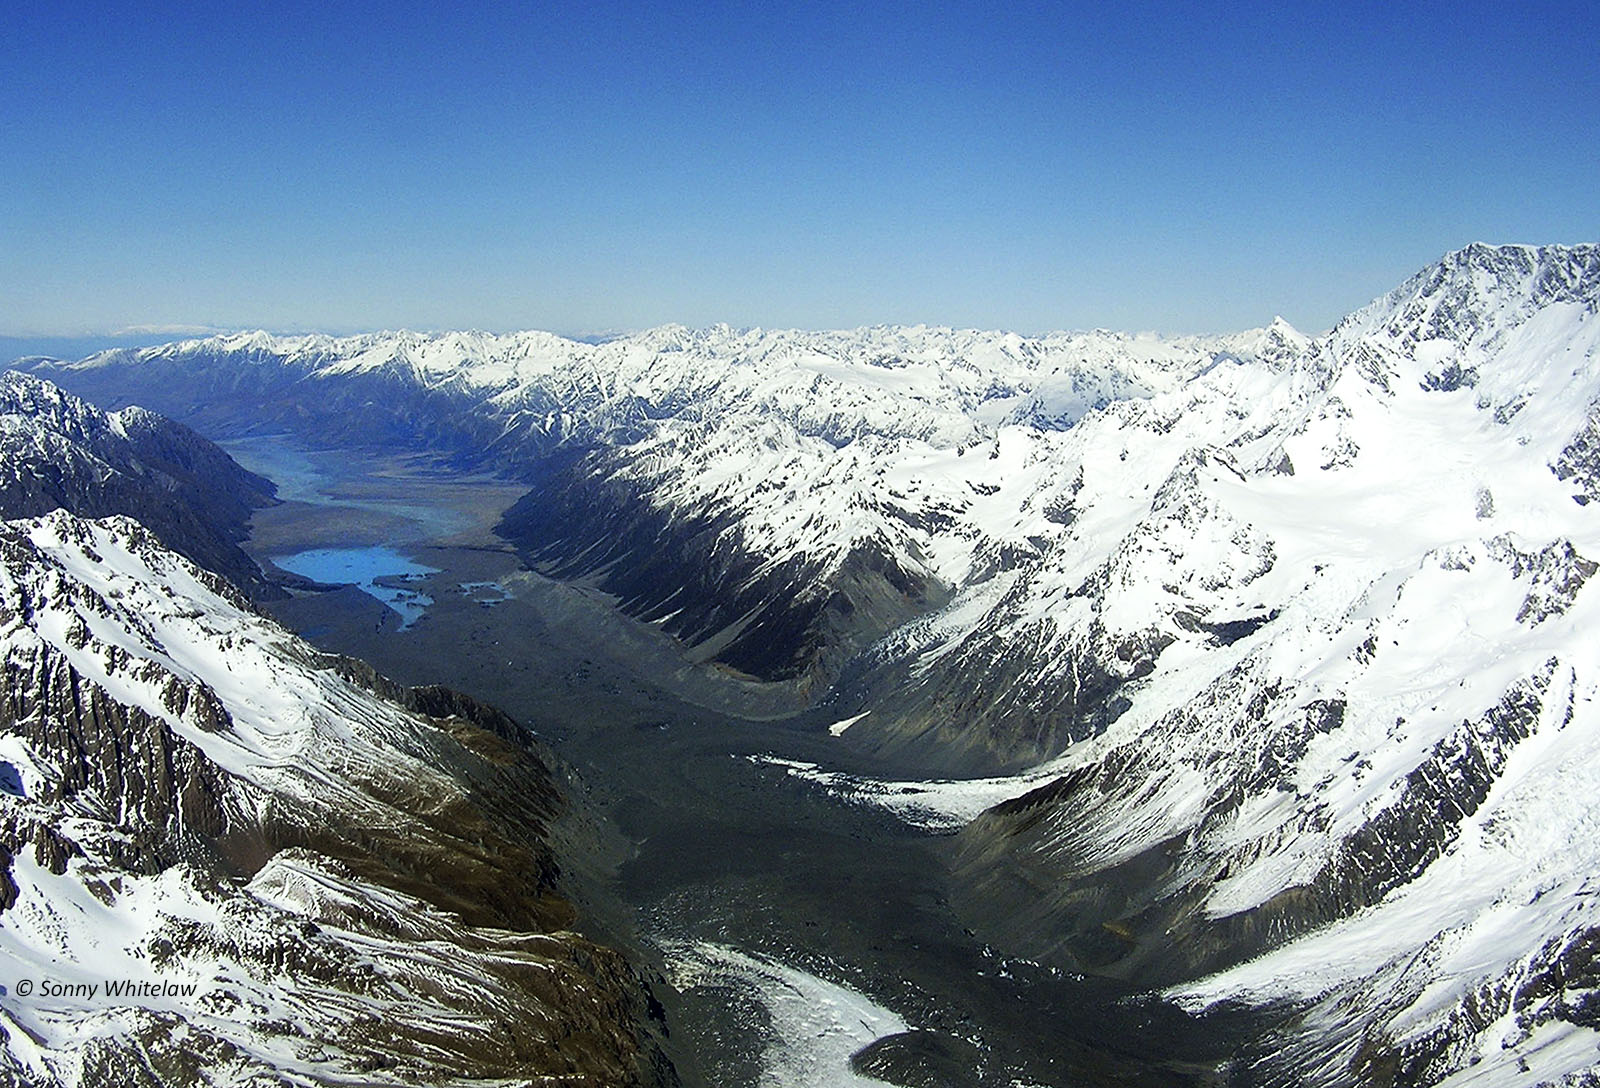 Facing South: Tasman Glacier (foreground – darker areas are moraine gravels over the ice) on the eastern side of Aoraki Mt Cook (right), and Tasman River (centre back).